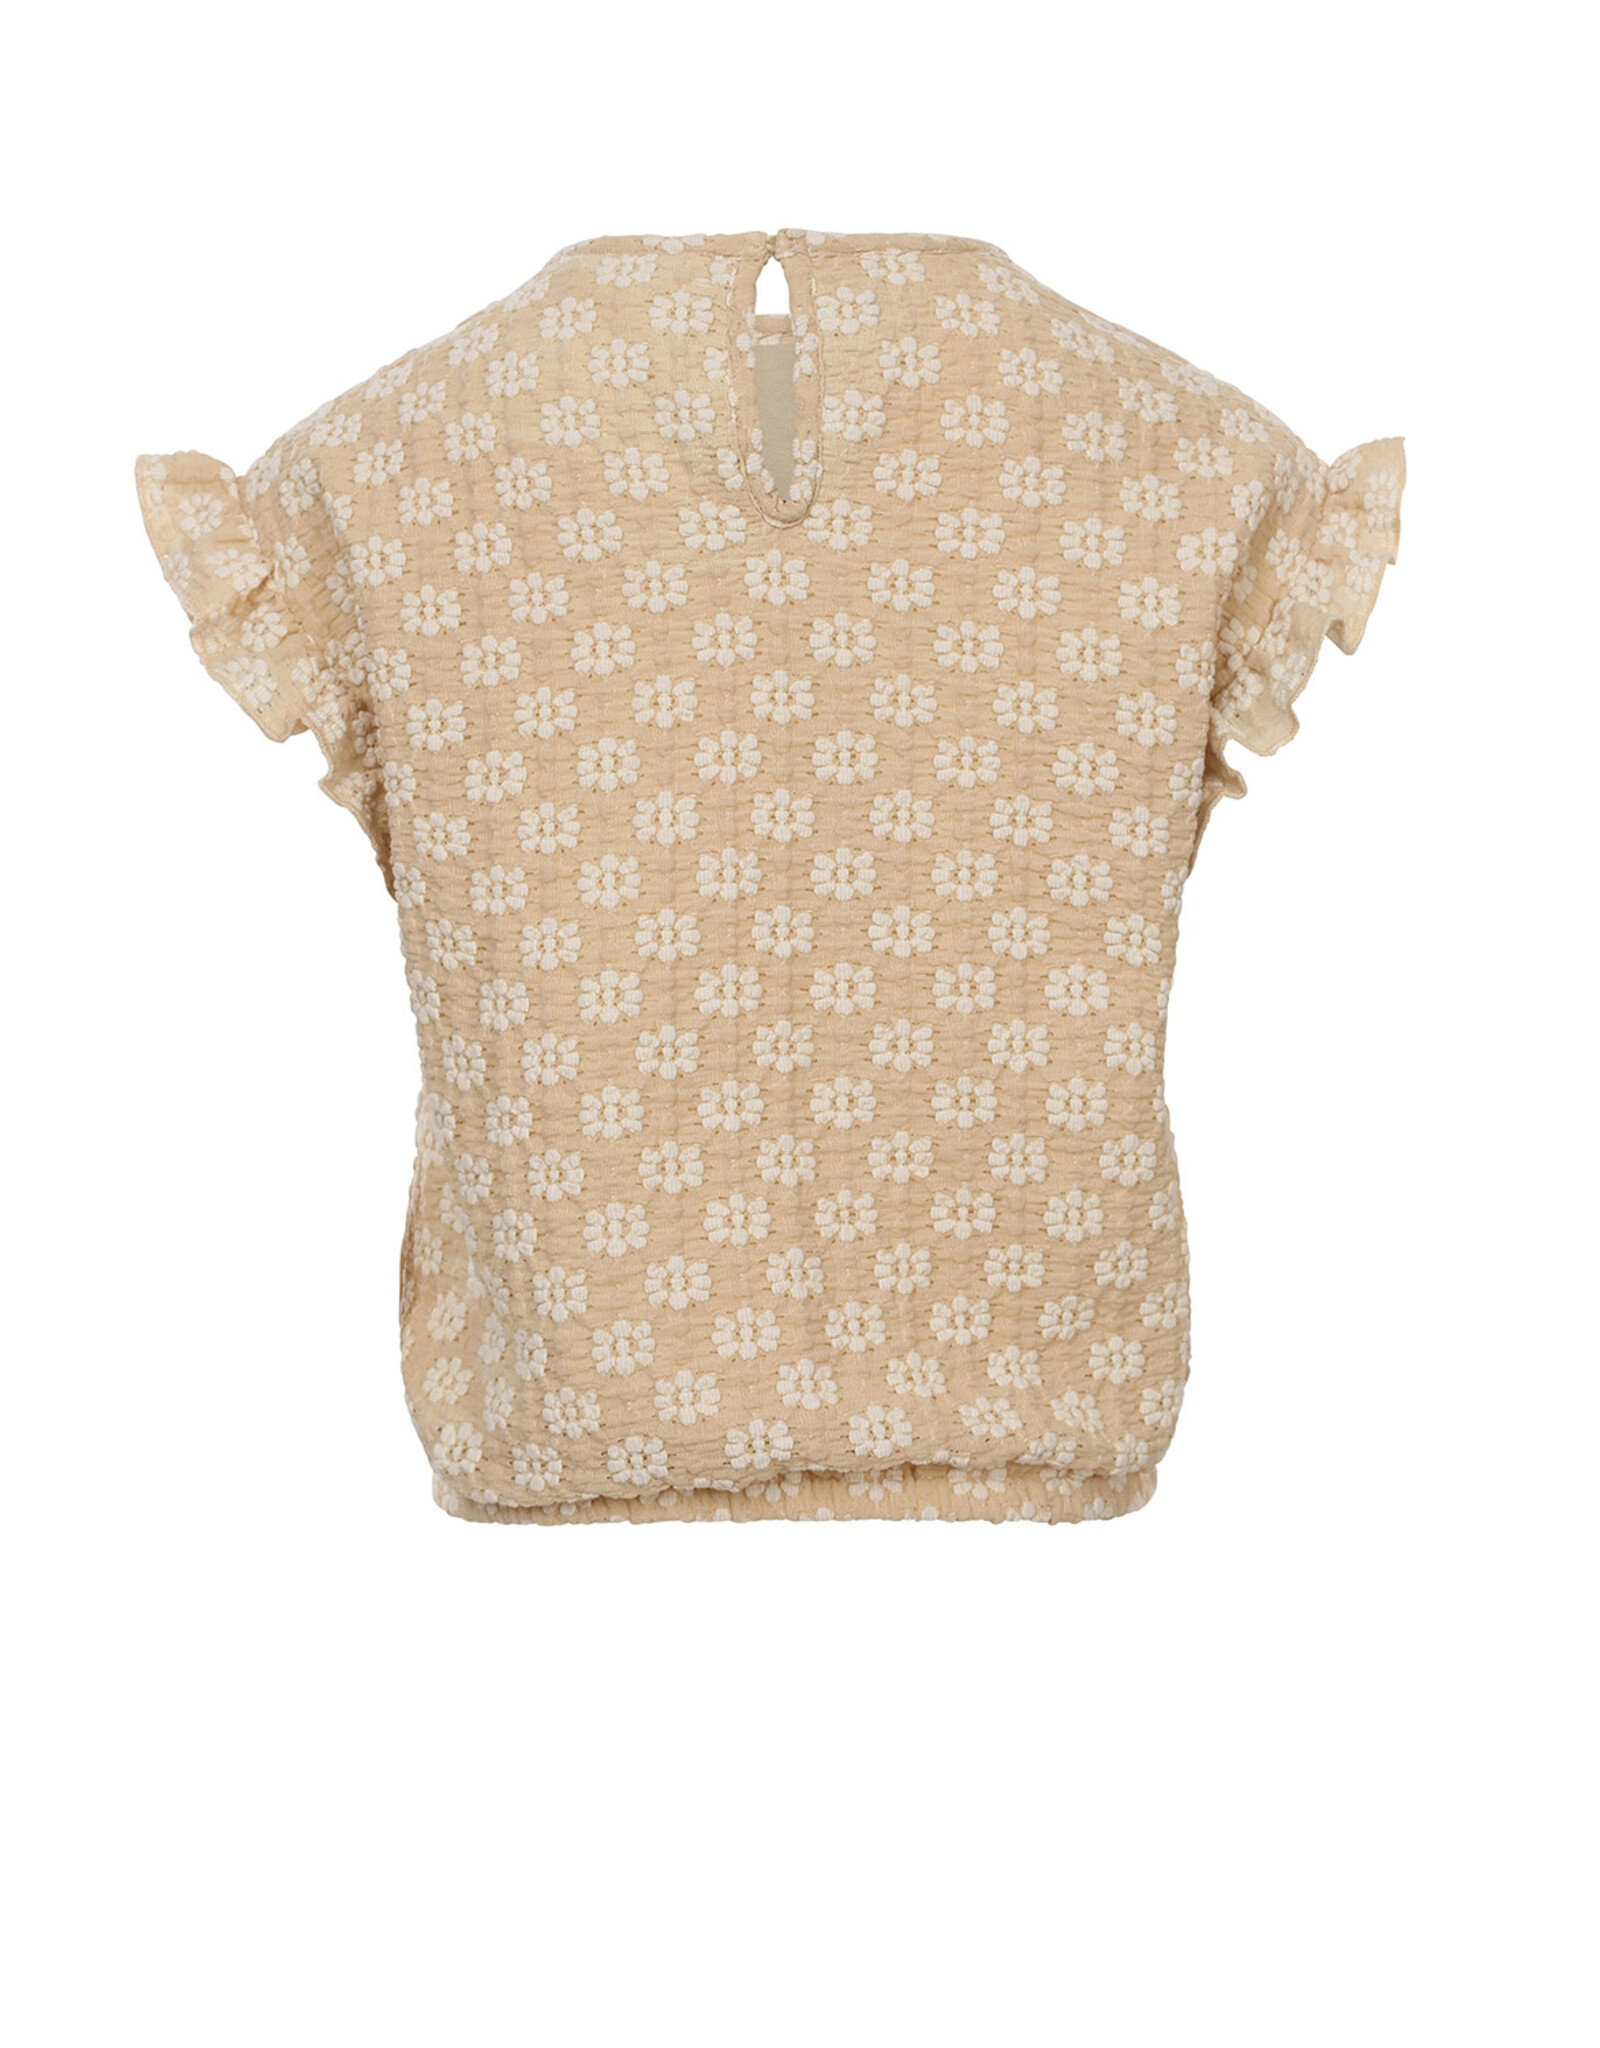 LOOXS Little 4-tshirts Little lace top bisquit